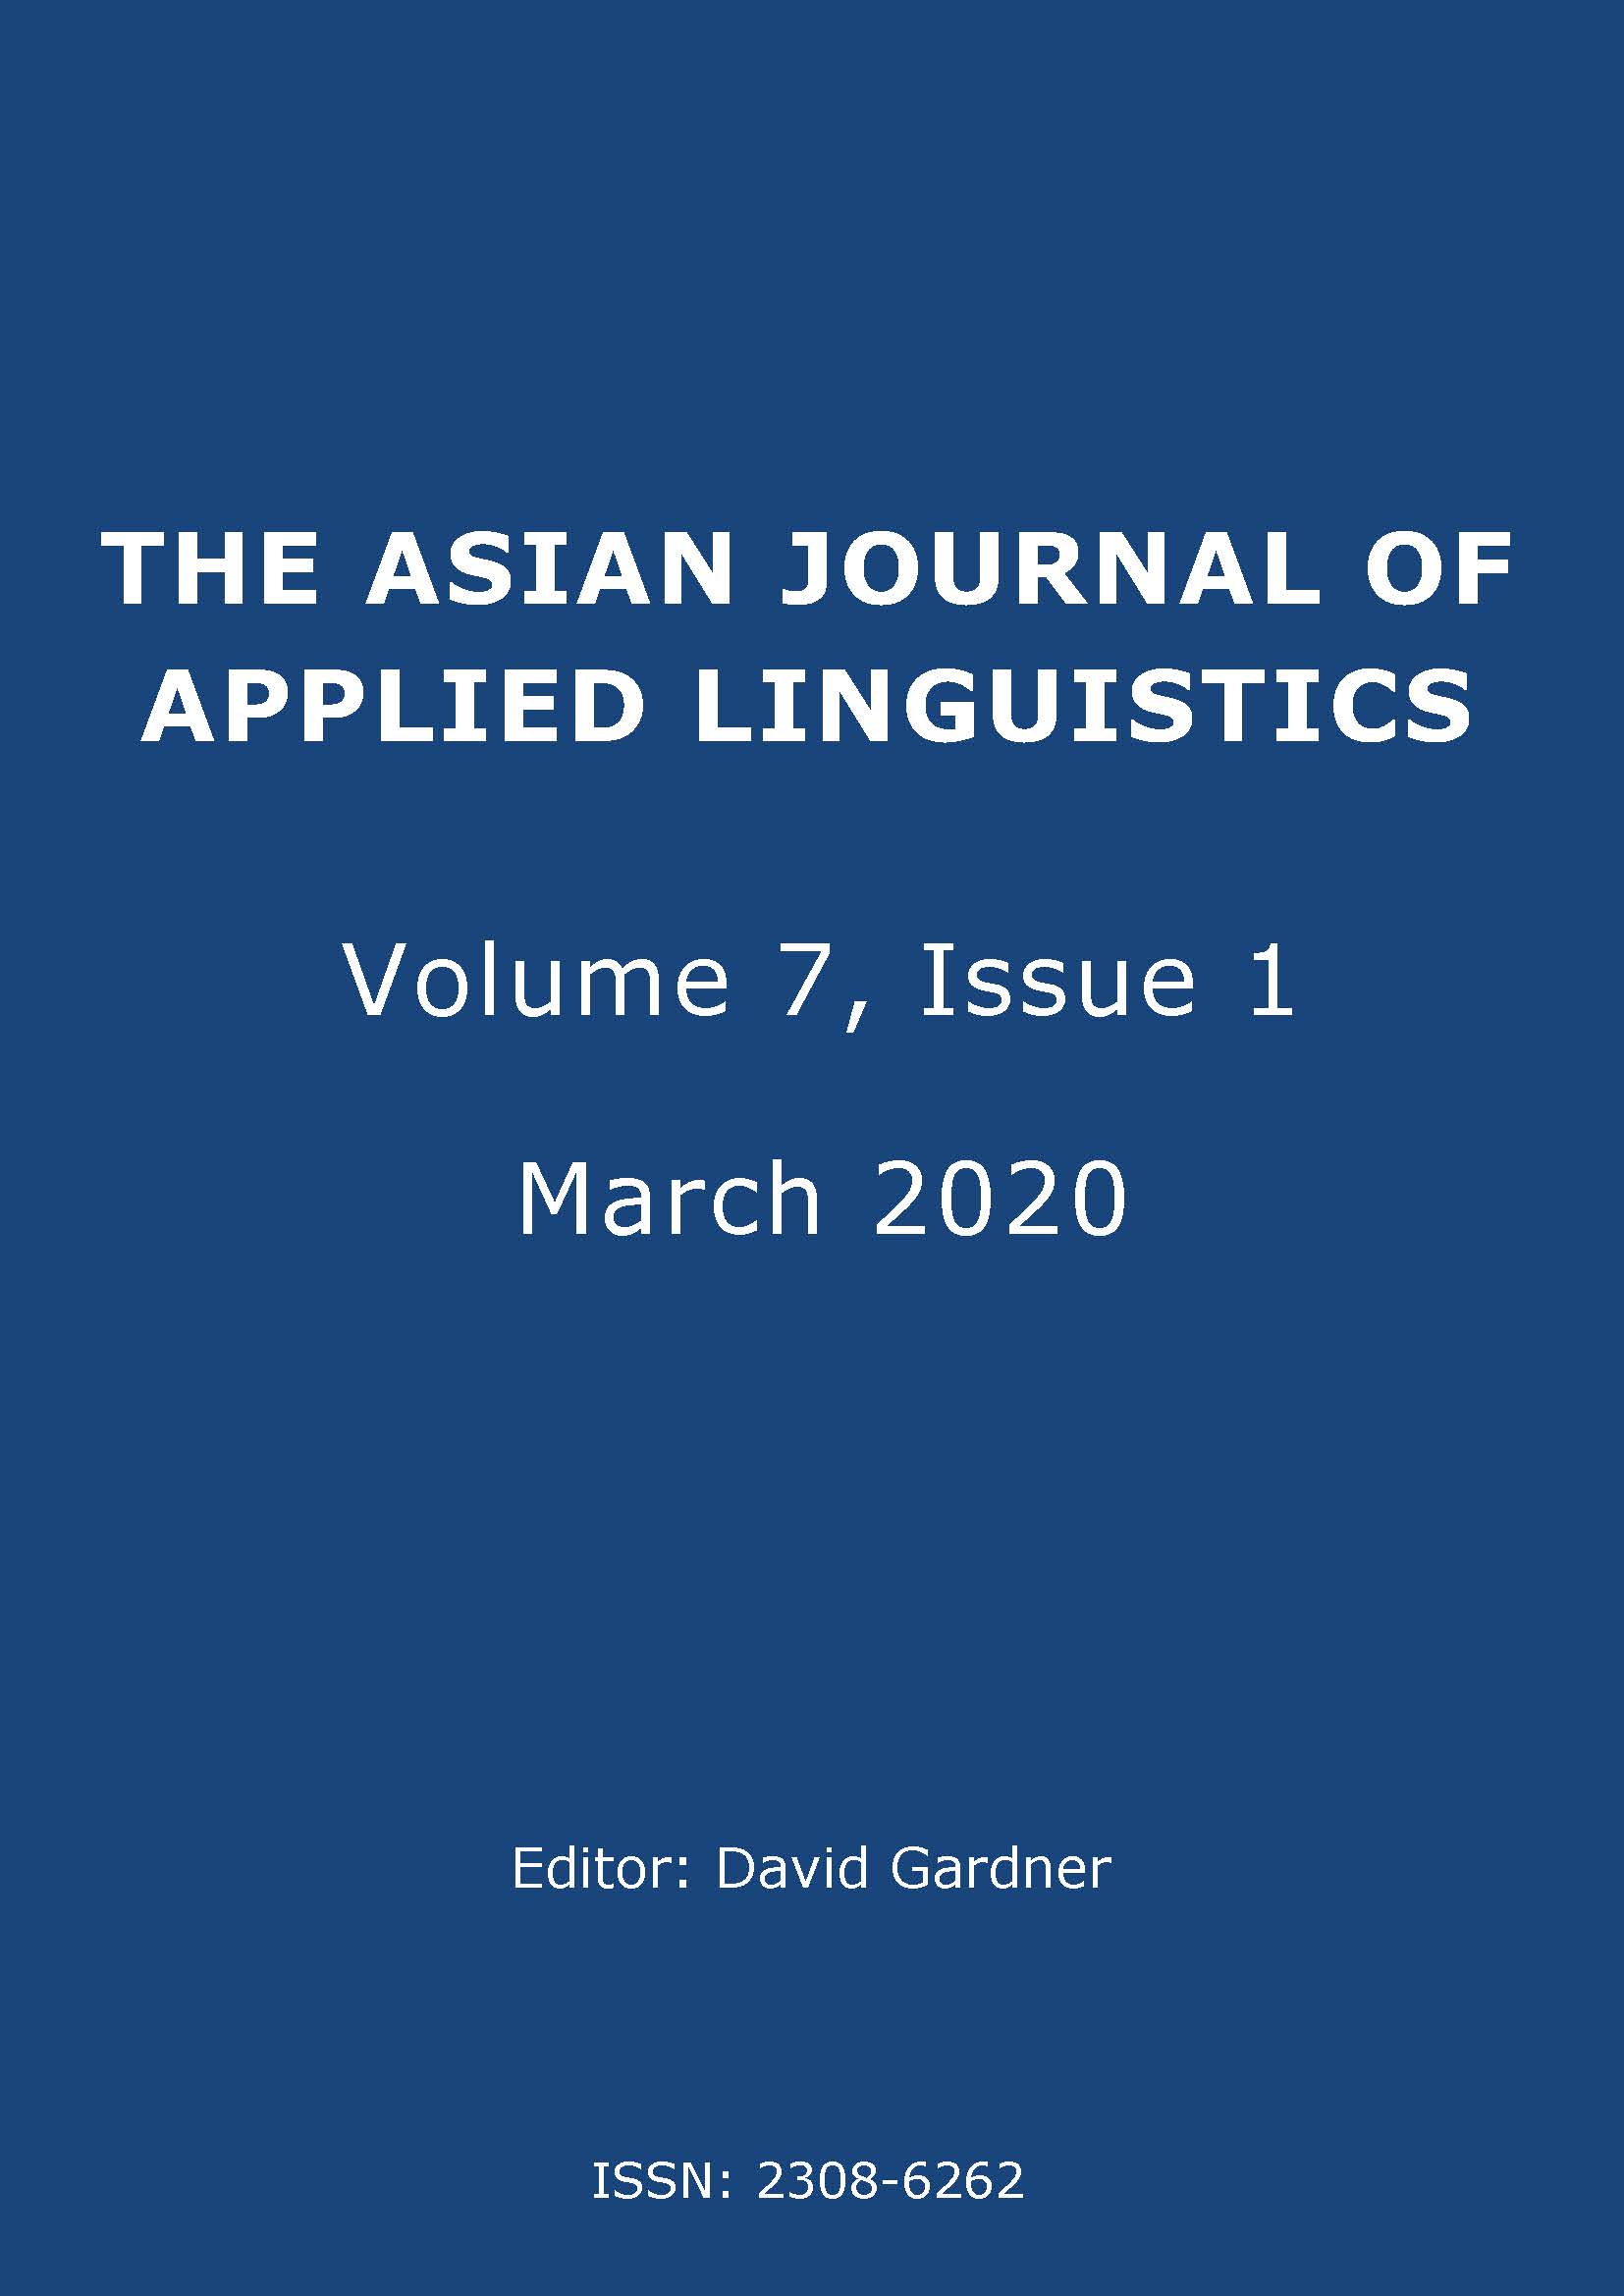 The Asian Journal of Applied Linguistics, Volume 7, Issue 1. March 2020.